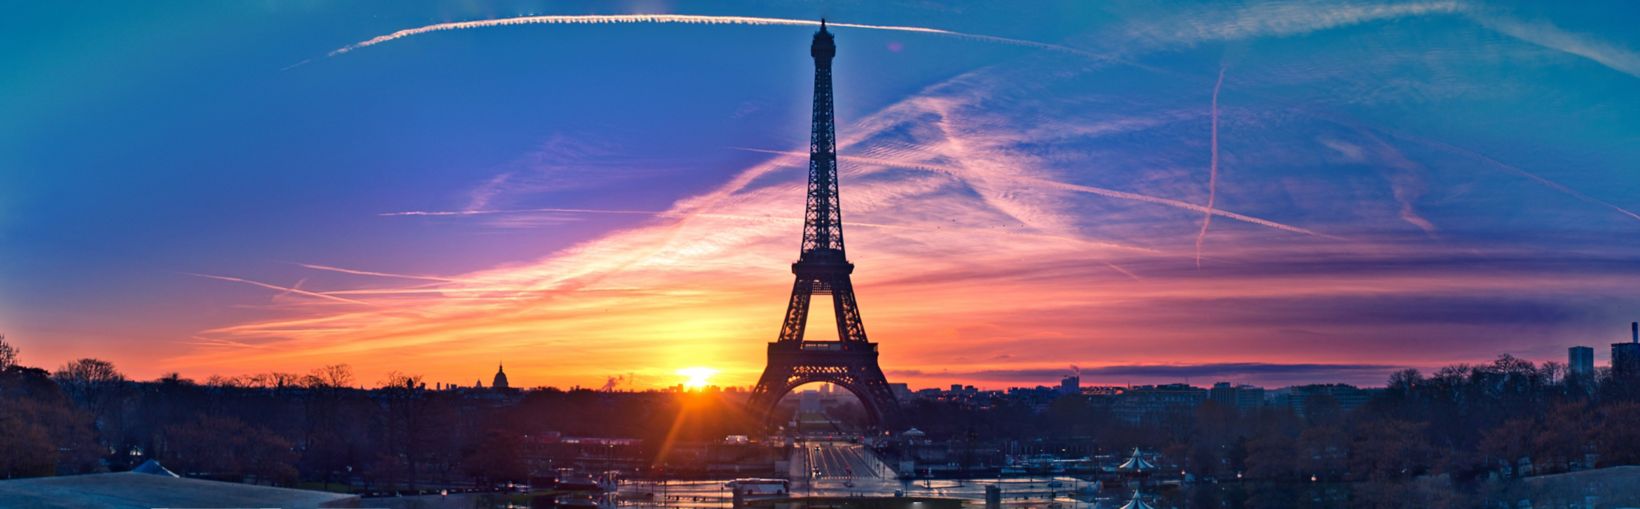 Amazing panorama of Paris very early in the morning, with Eiffel Tower included       